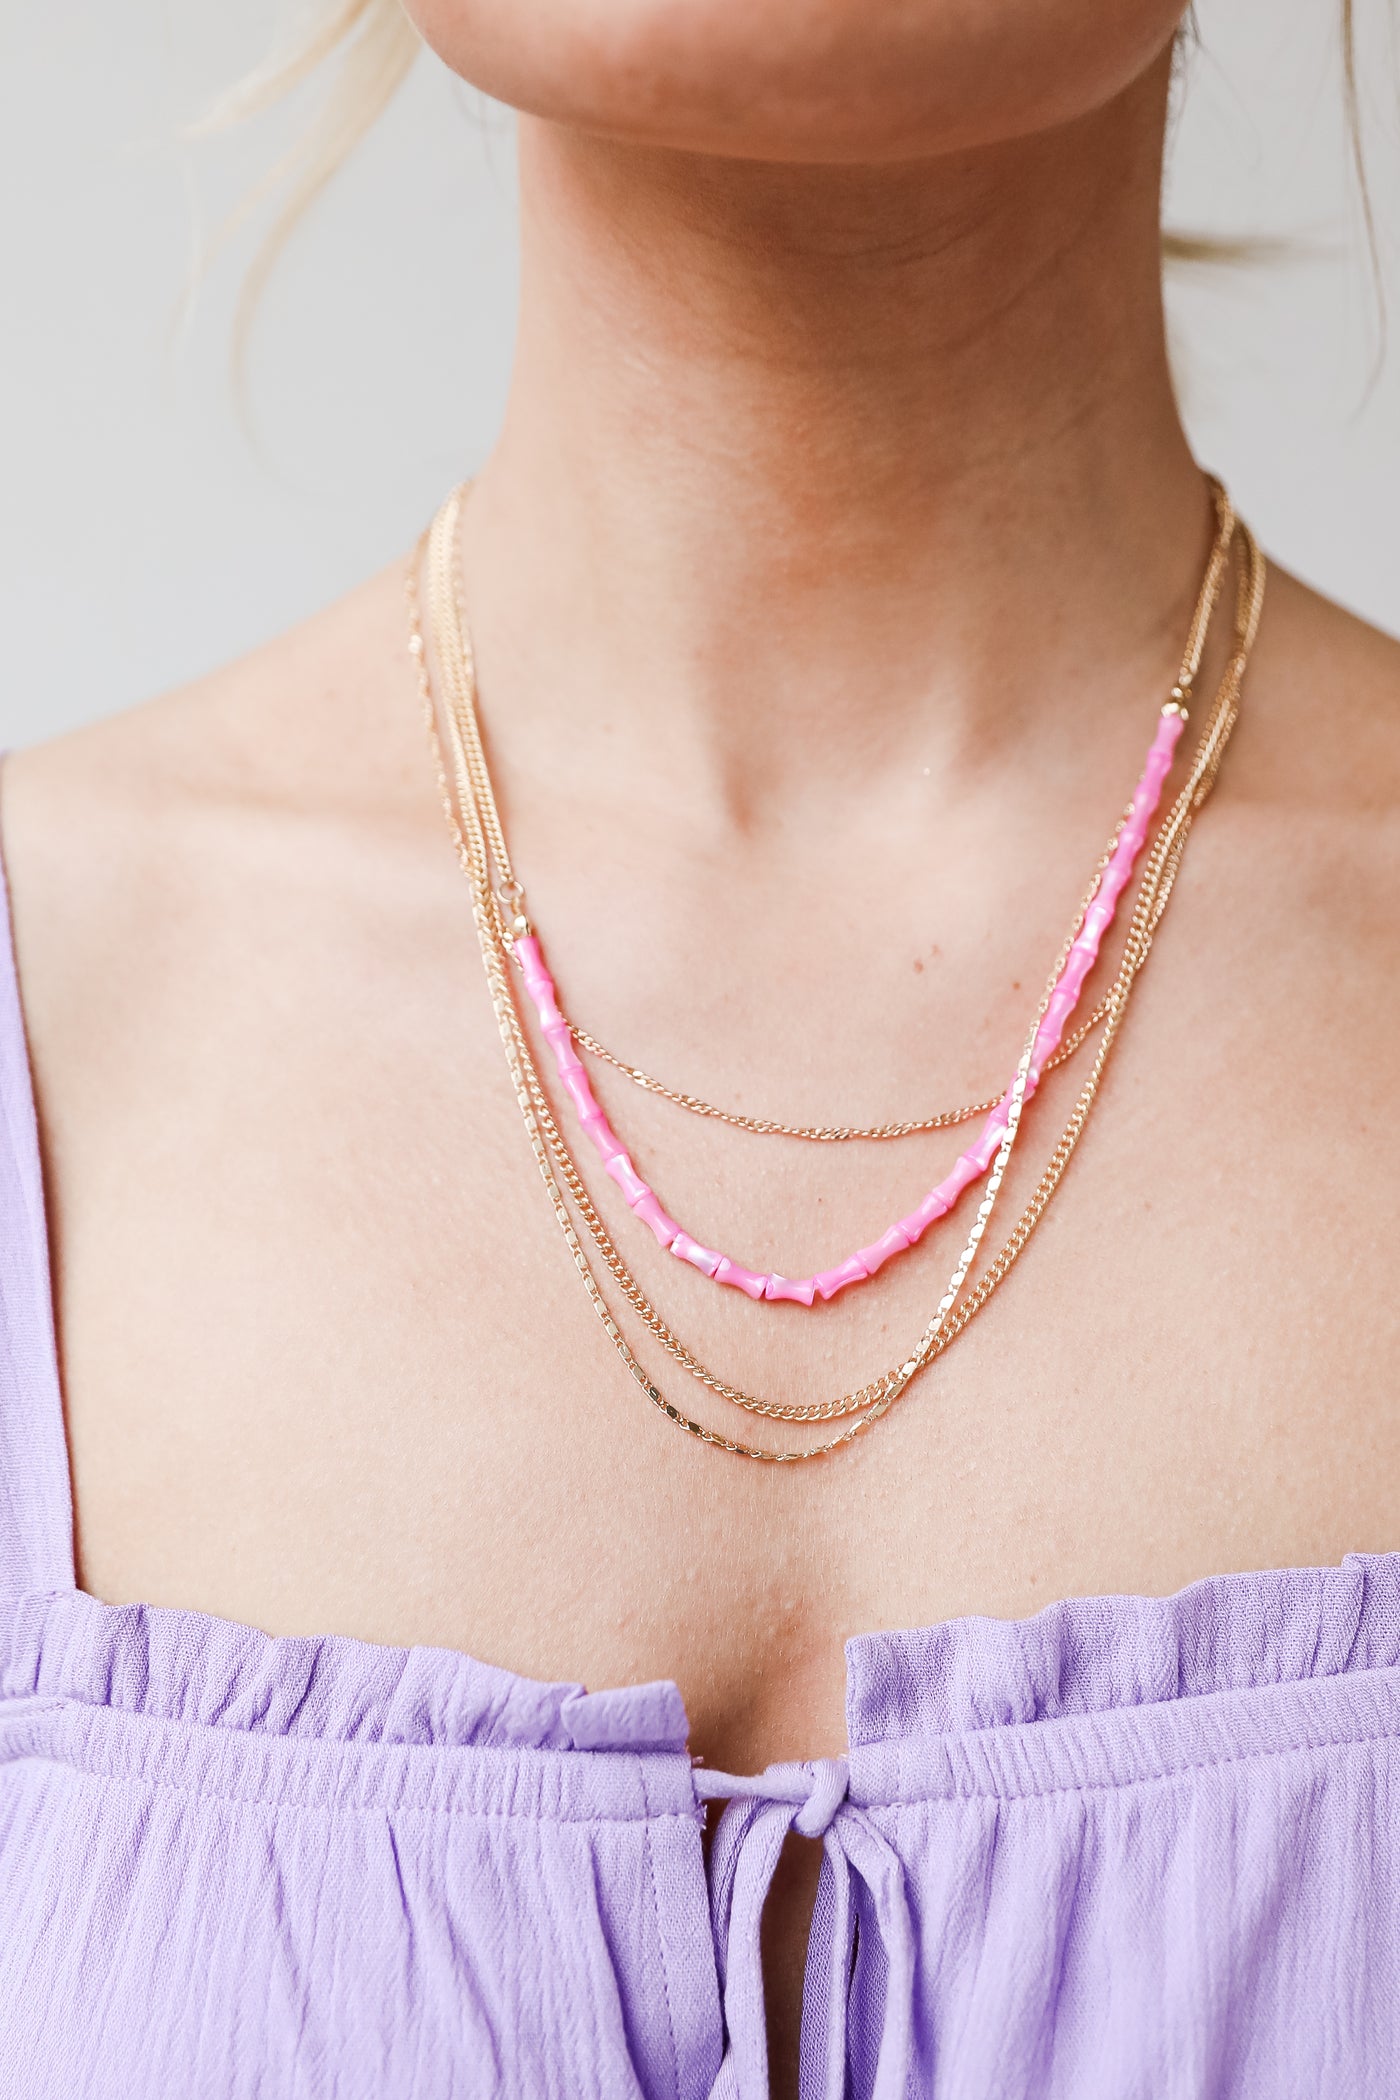 Gold Beaded Layered Chain Necklace on model